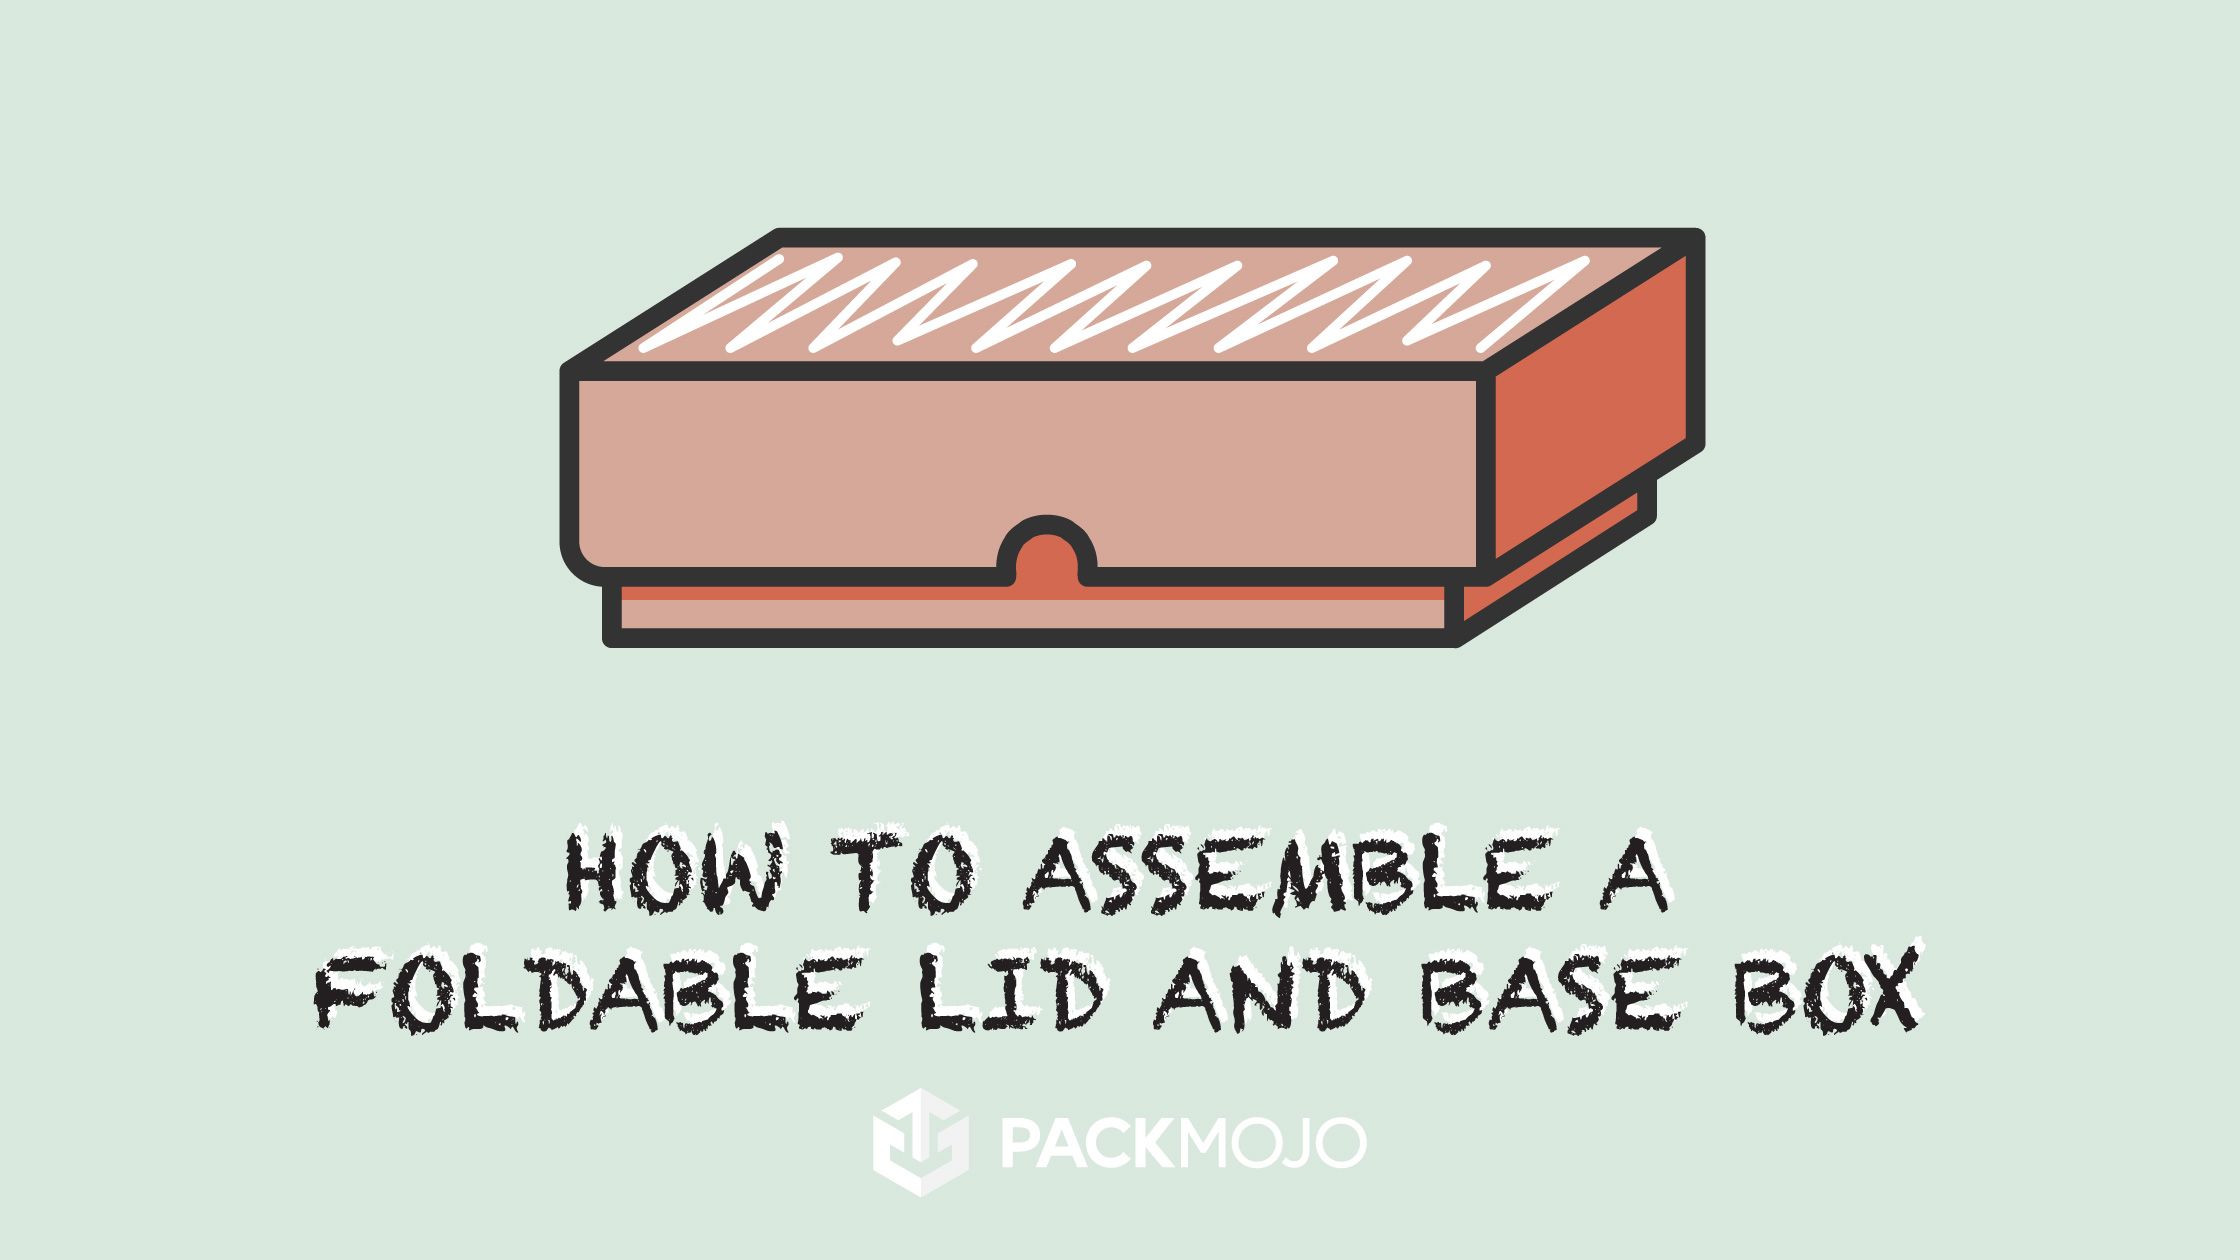 How to Assemble a Foldable Lid and Base Box Video Thumbnail